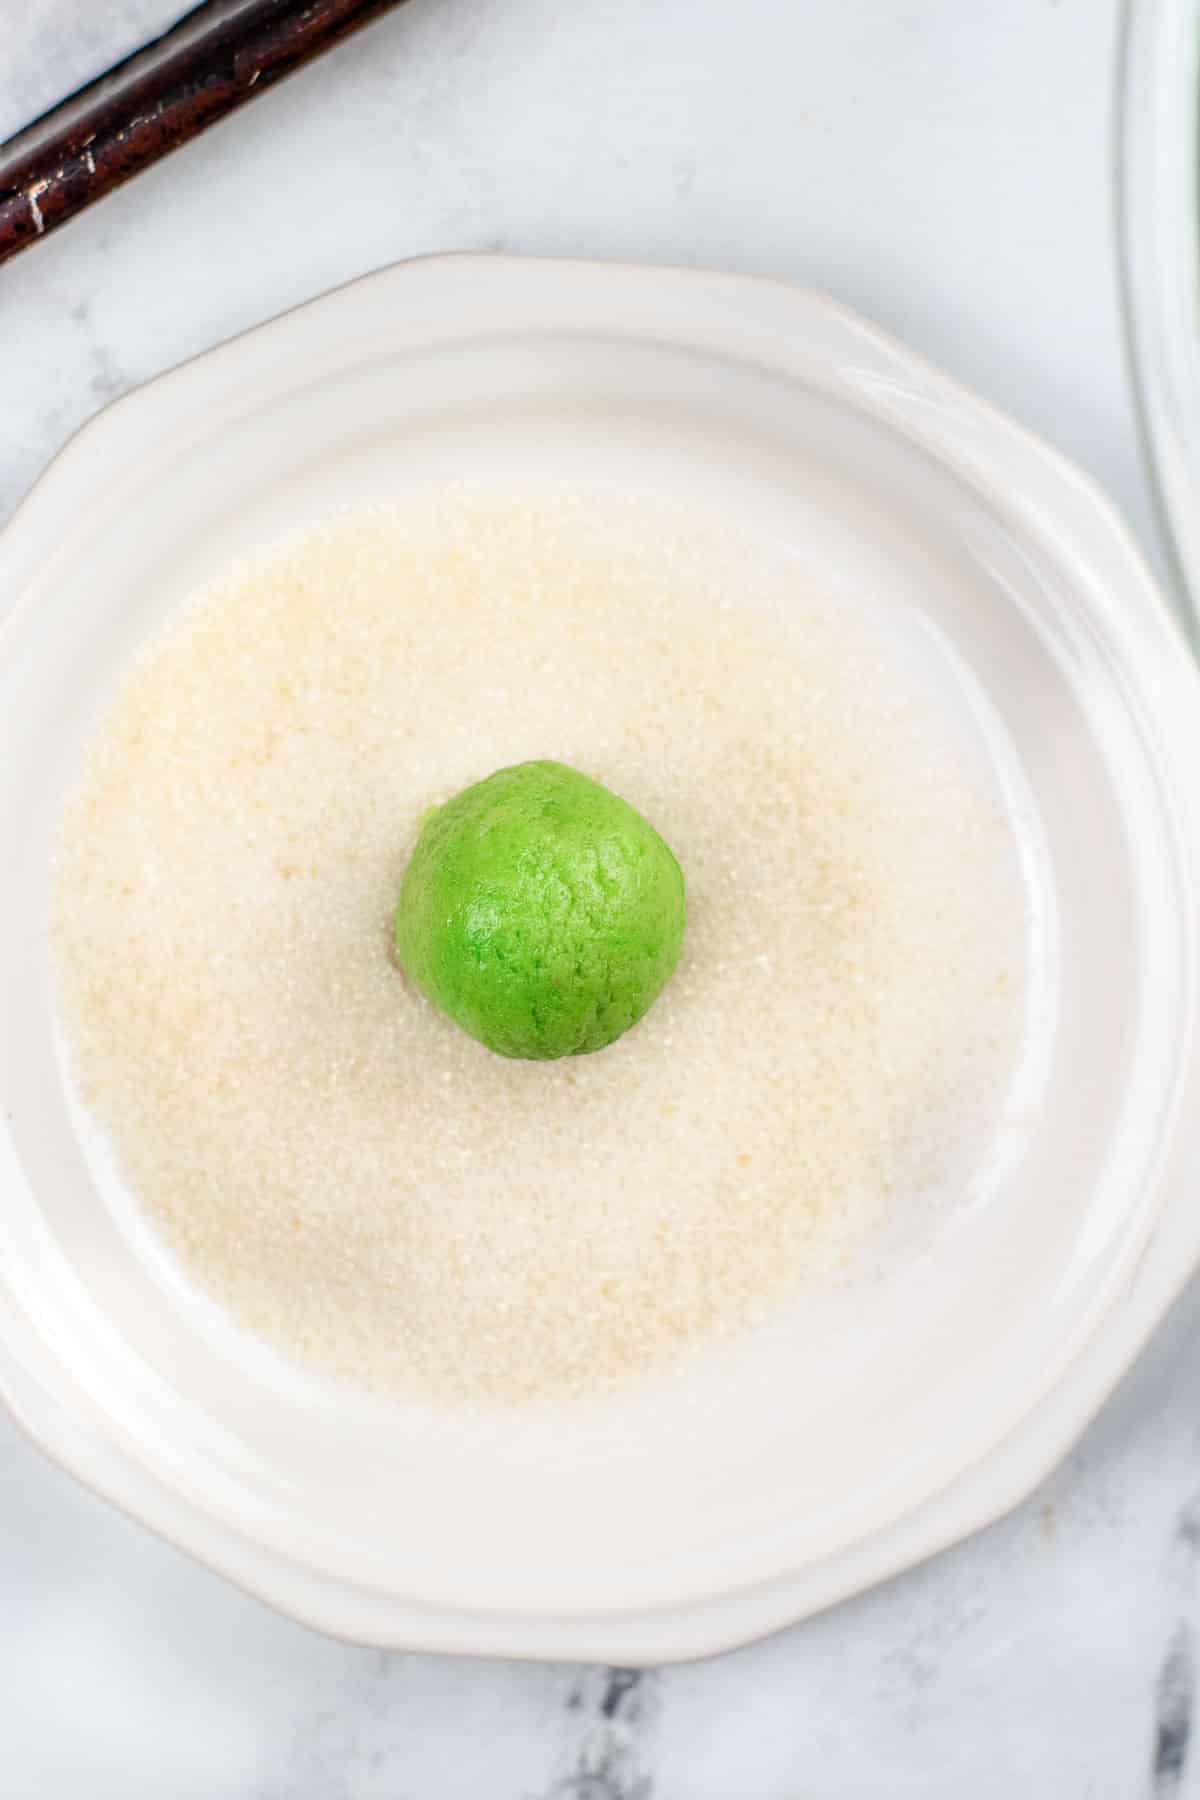 white plate of sugar with a green cookie dough ball in the center.